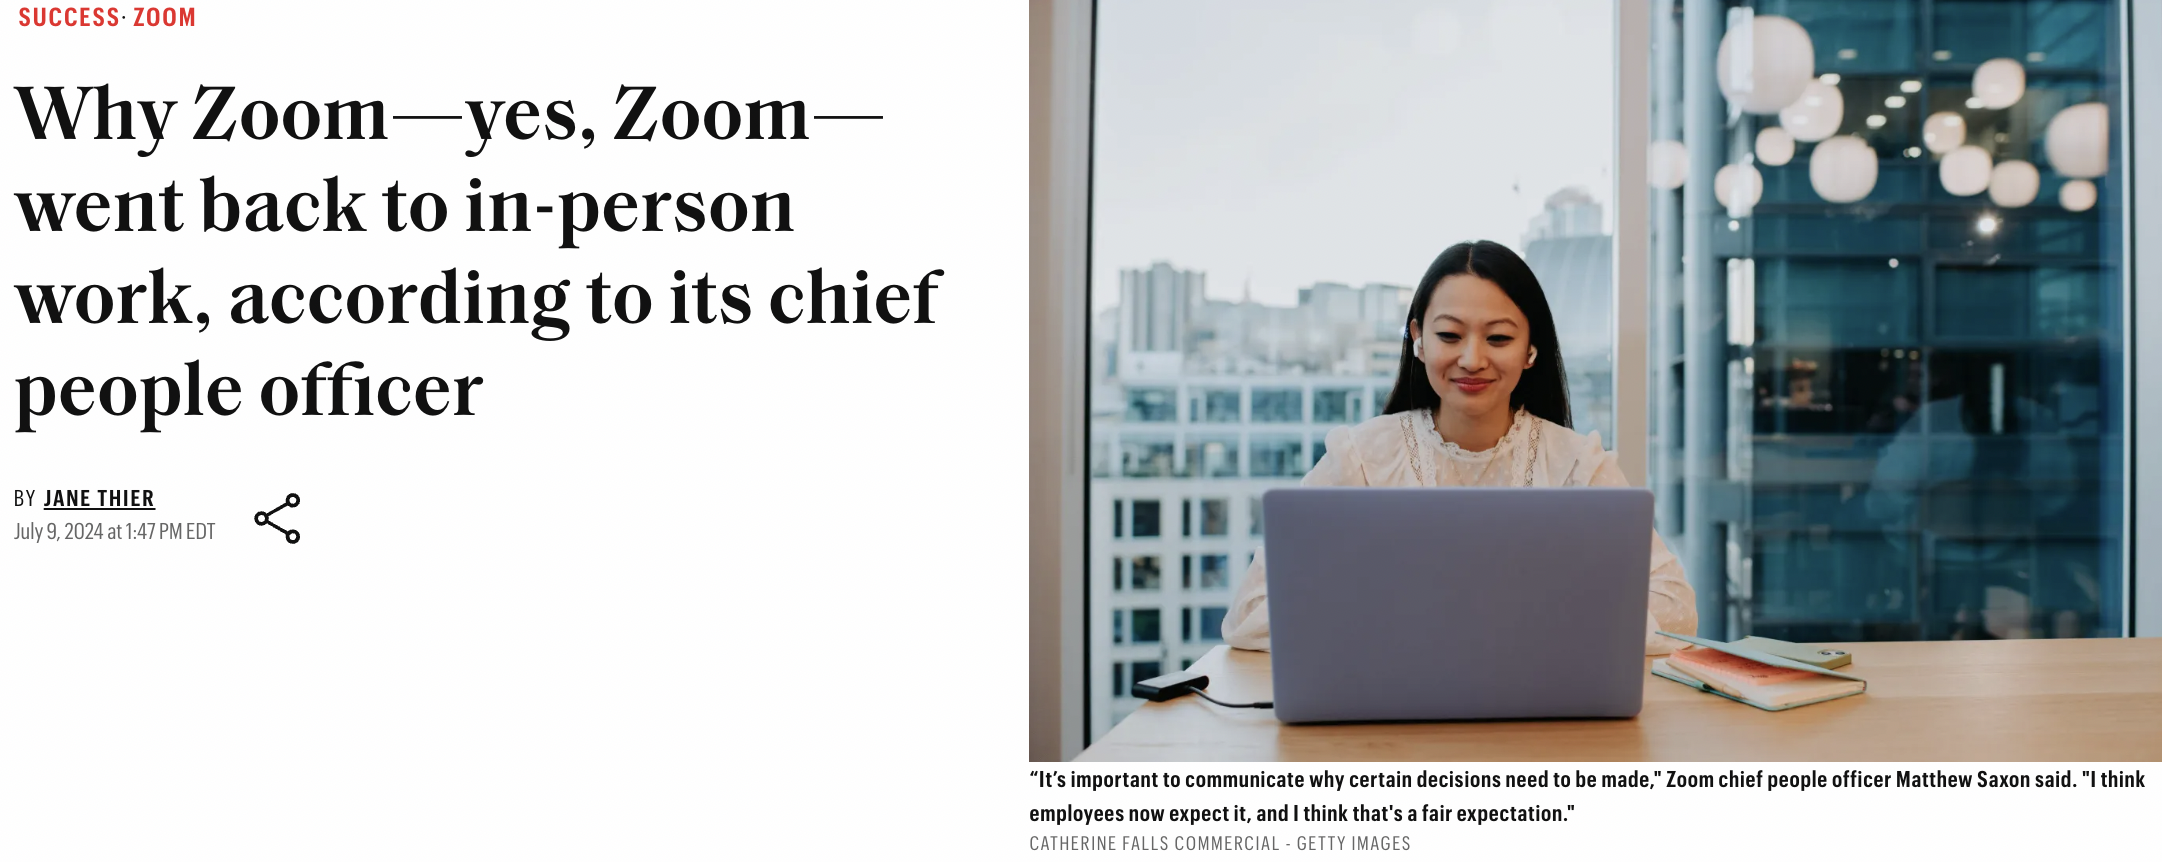 Photograph - Success Zoom Why Zoomyes, Zoom went back to inperson work, according to its chief people officer By Jane Thier dy92024142T "It's important to communicate why certain decisions need to be made." Zoom chief people officer Matthew Saxon said. "I